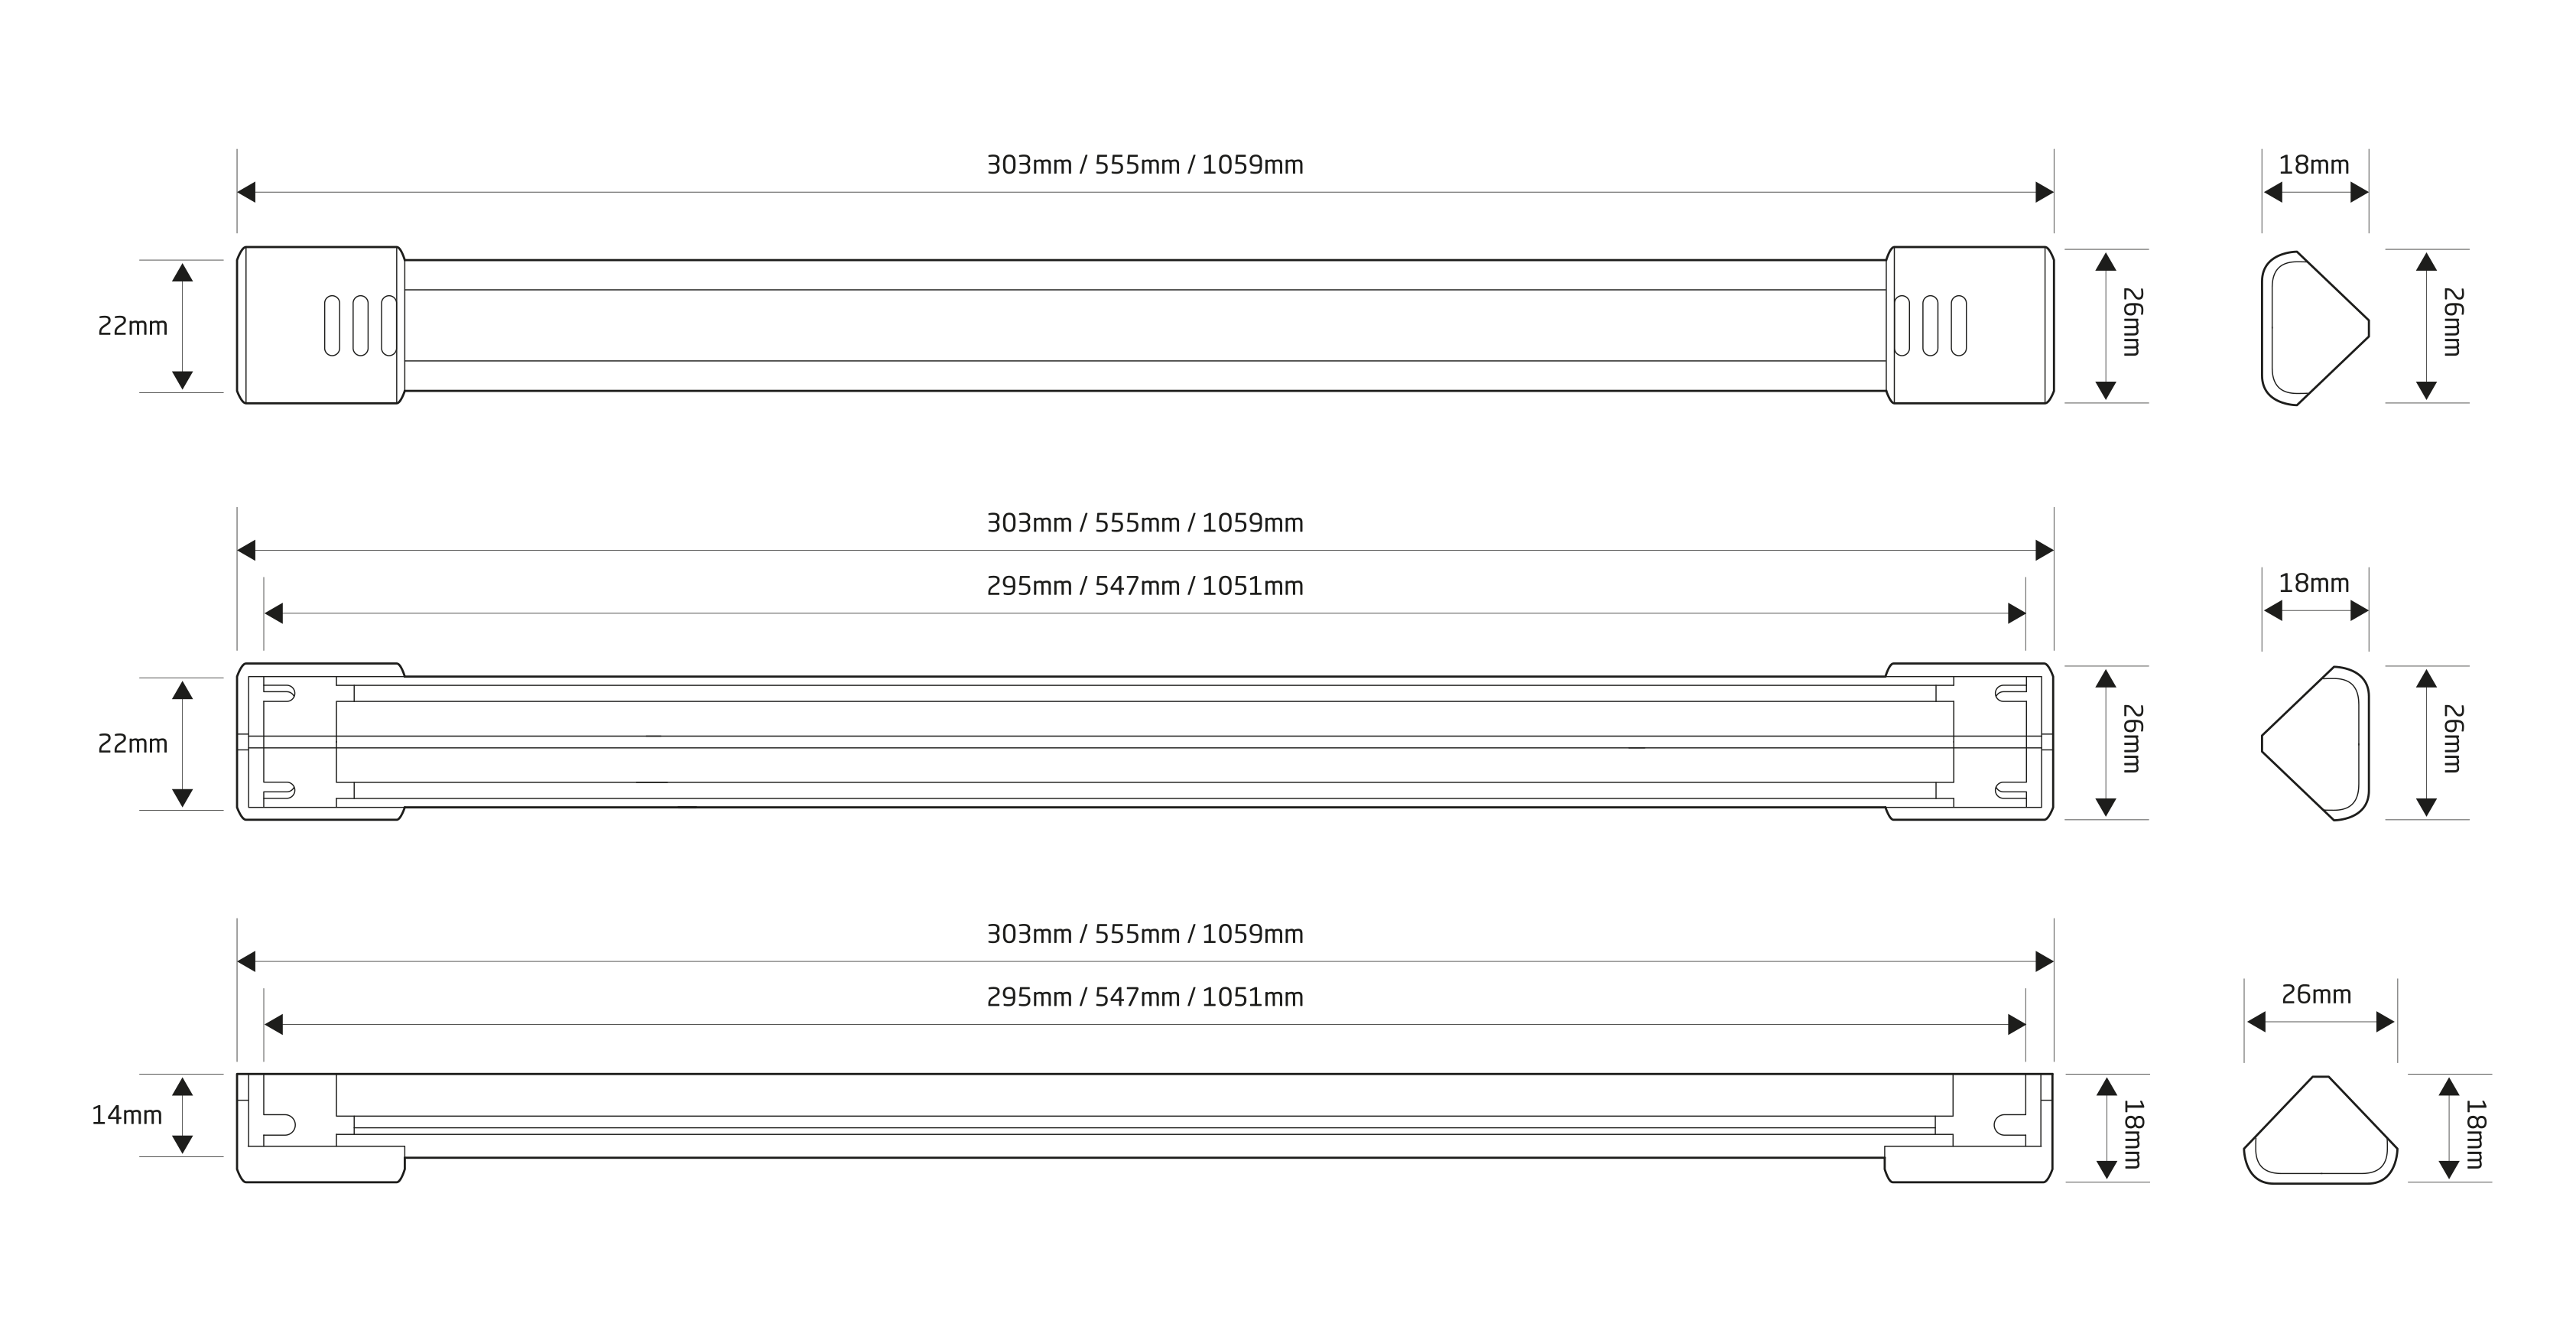 L98 Light Strip Dimensions Drawing Showing length with end caps 303/555/1059, length without end caps 295/547/1051mm, height with end caps 26mm, height without end caps 22mm, depth with end caps 18mm and depth without end caps 18mm.